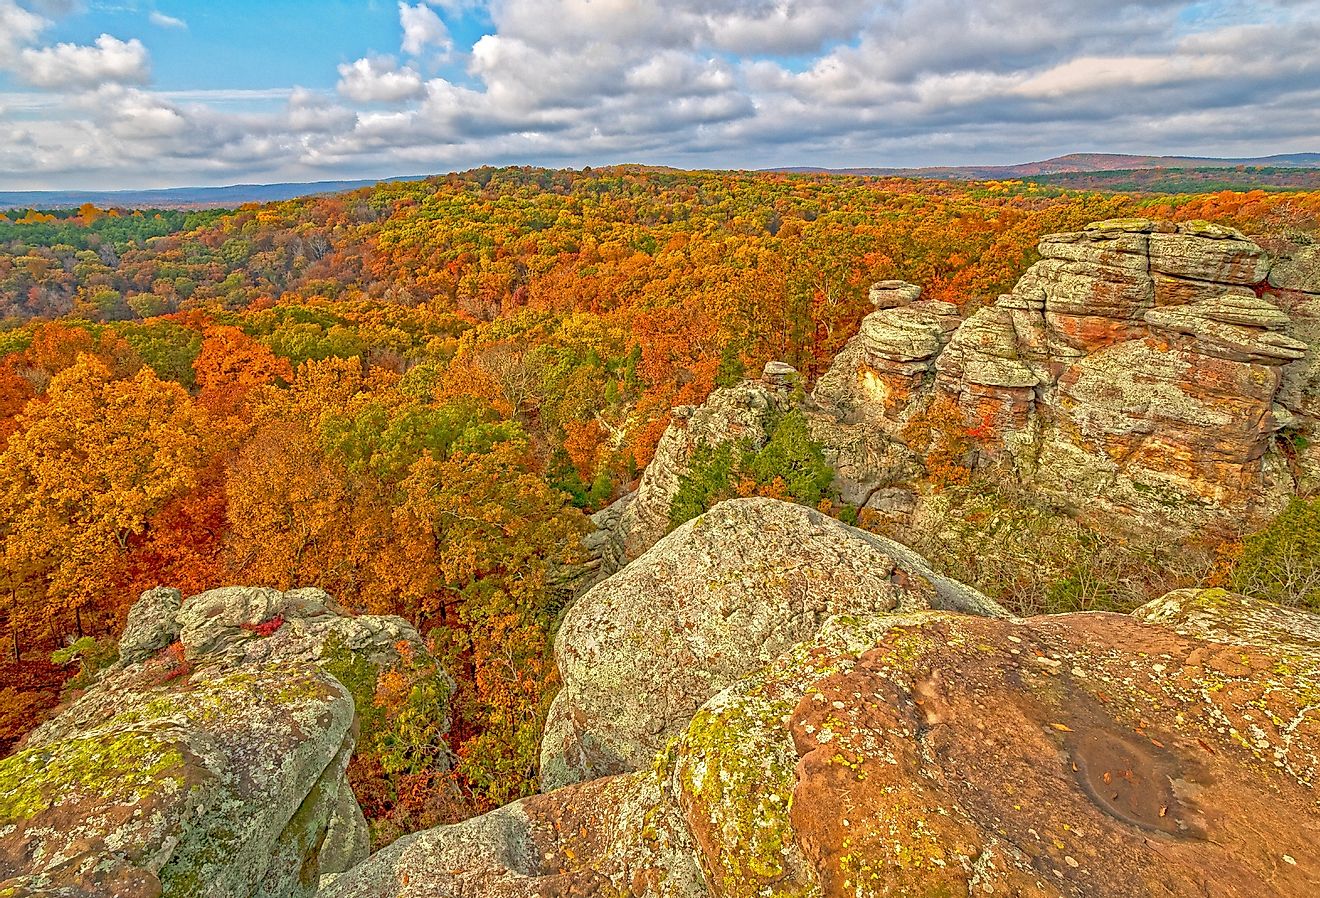 Sunny skies and fall colors in Garden of the Gods in Shawnee National Forest in southern Illinois.